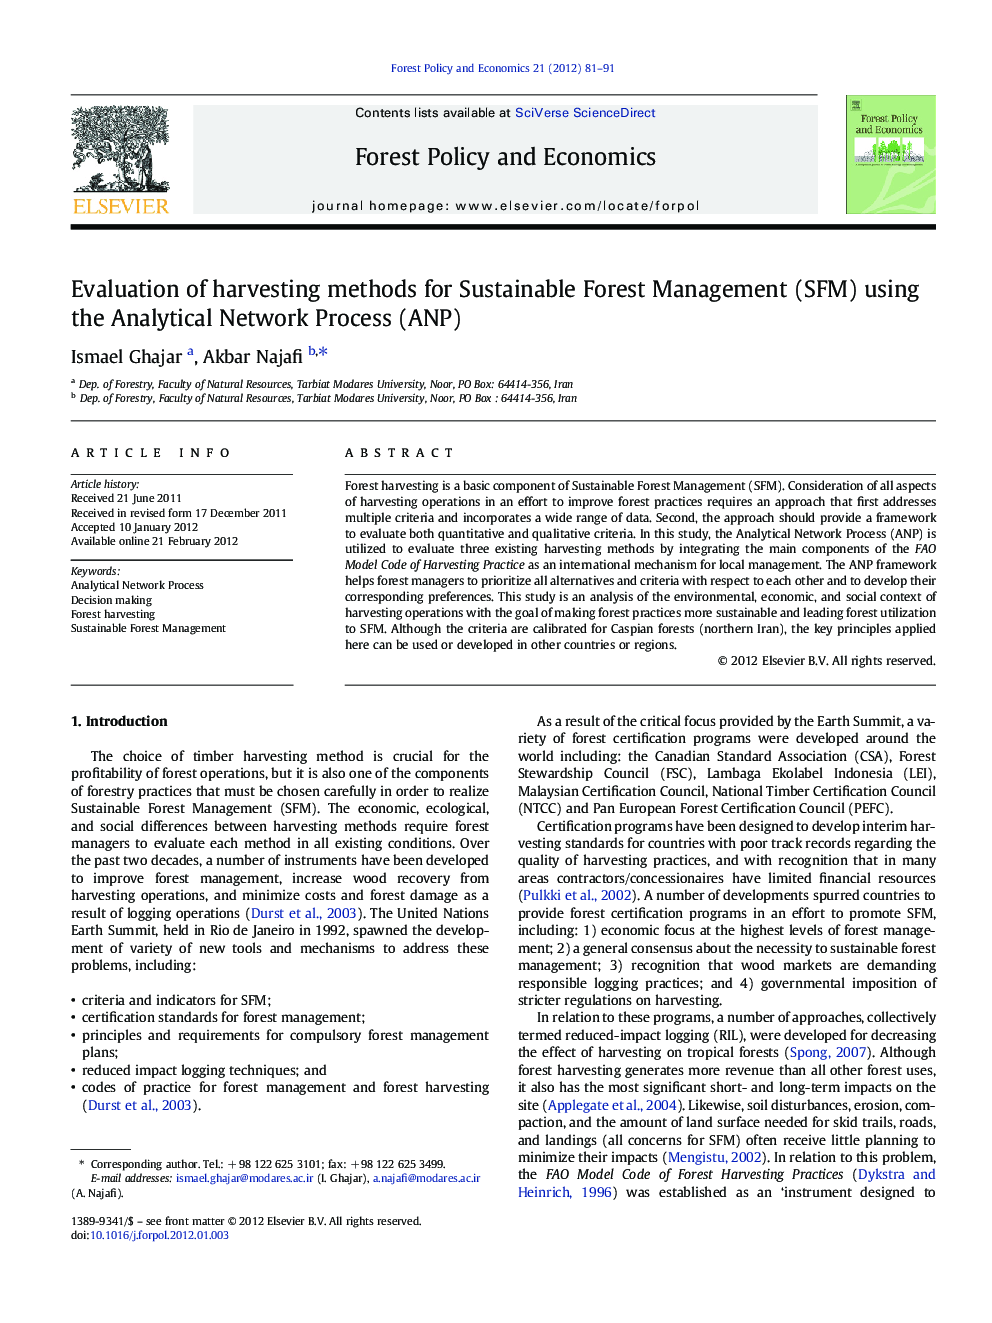 Evaluation of harvesting methods for Sustainable Forest Management (SFM) using the Analytical Network Process (ANP)